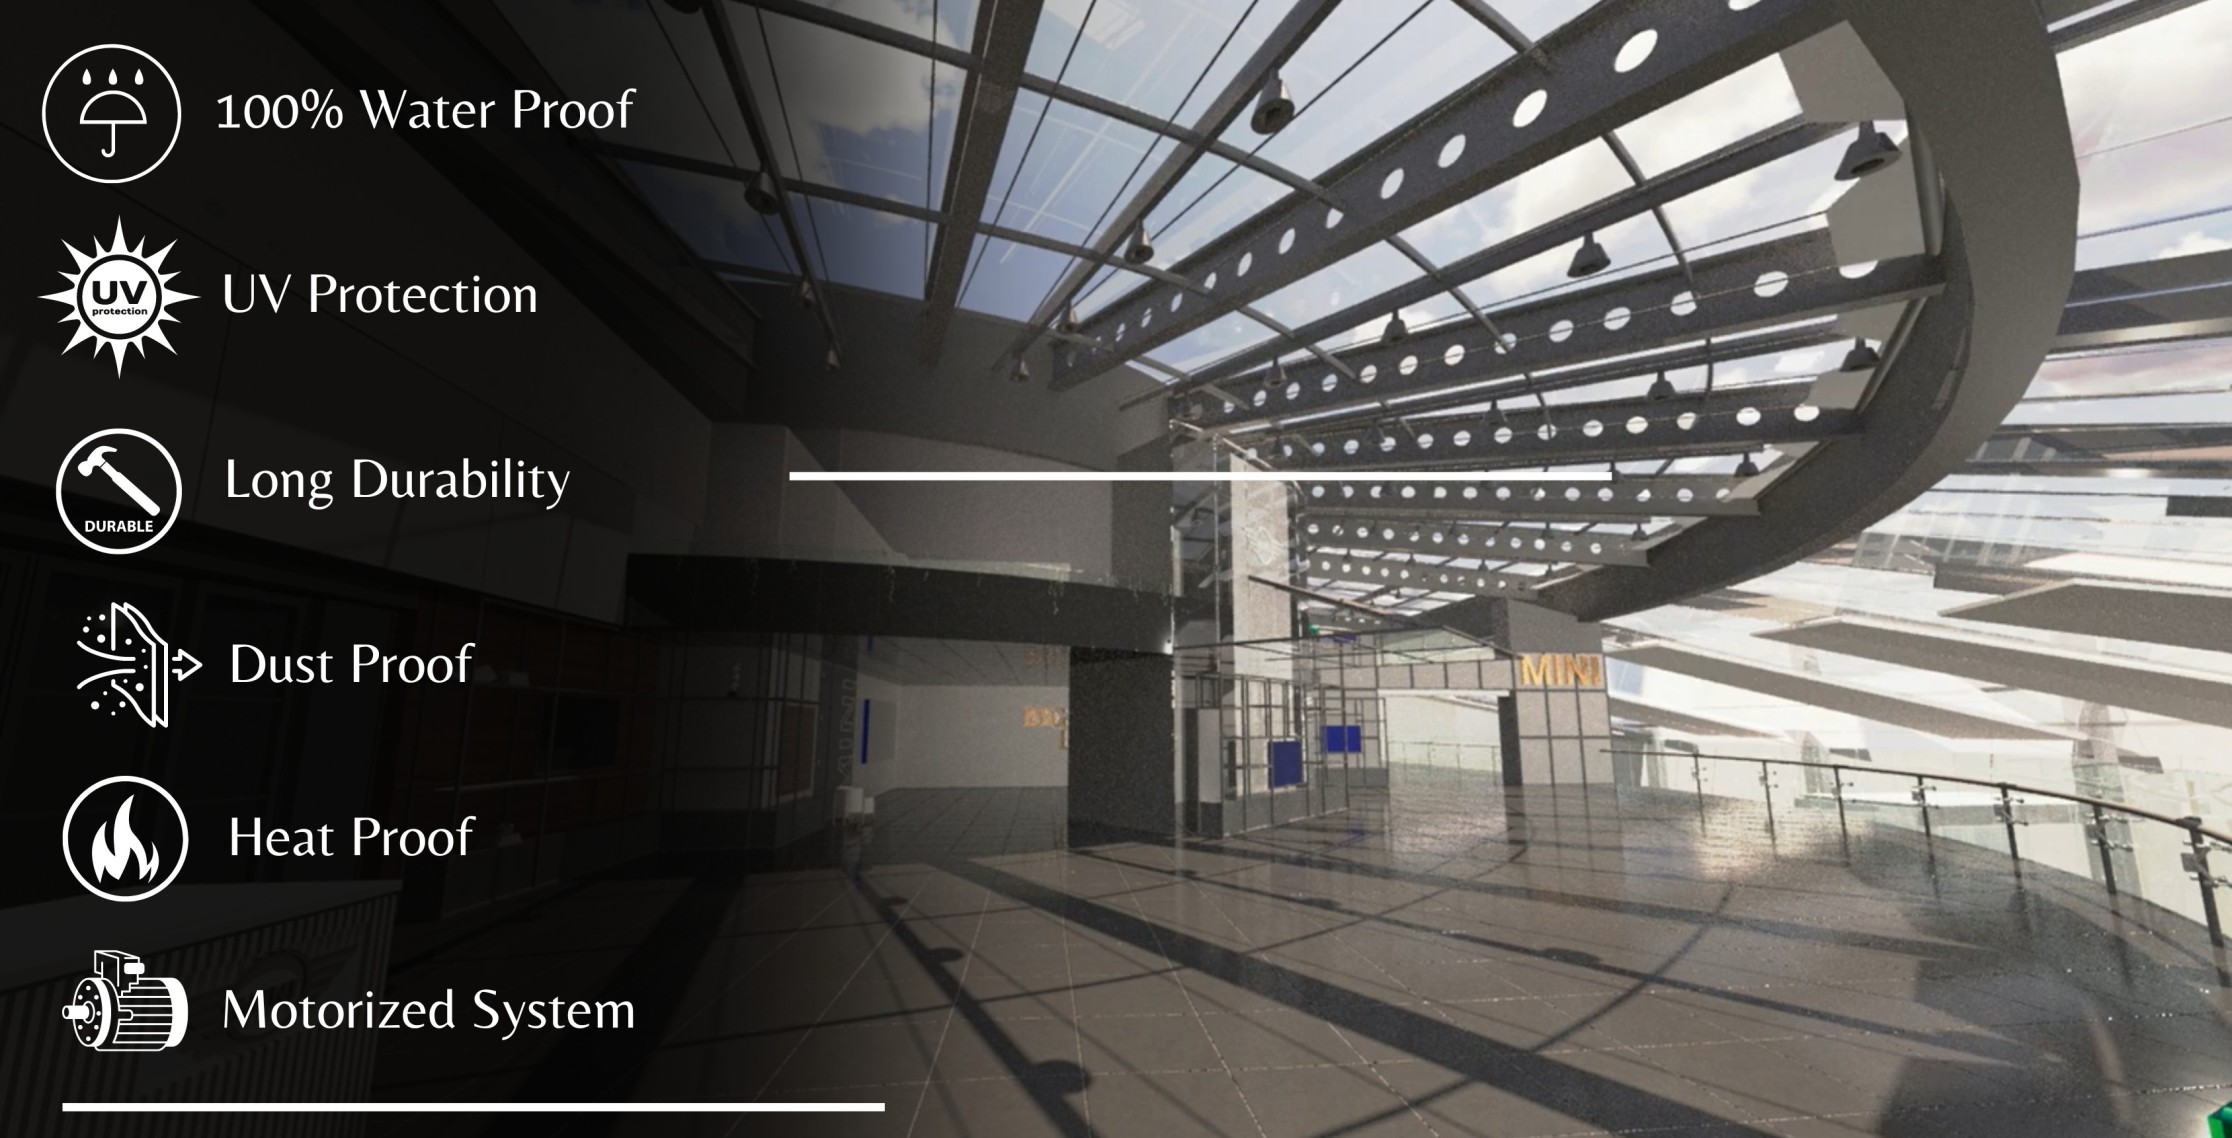 Features of Curved Retractable Roof